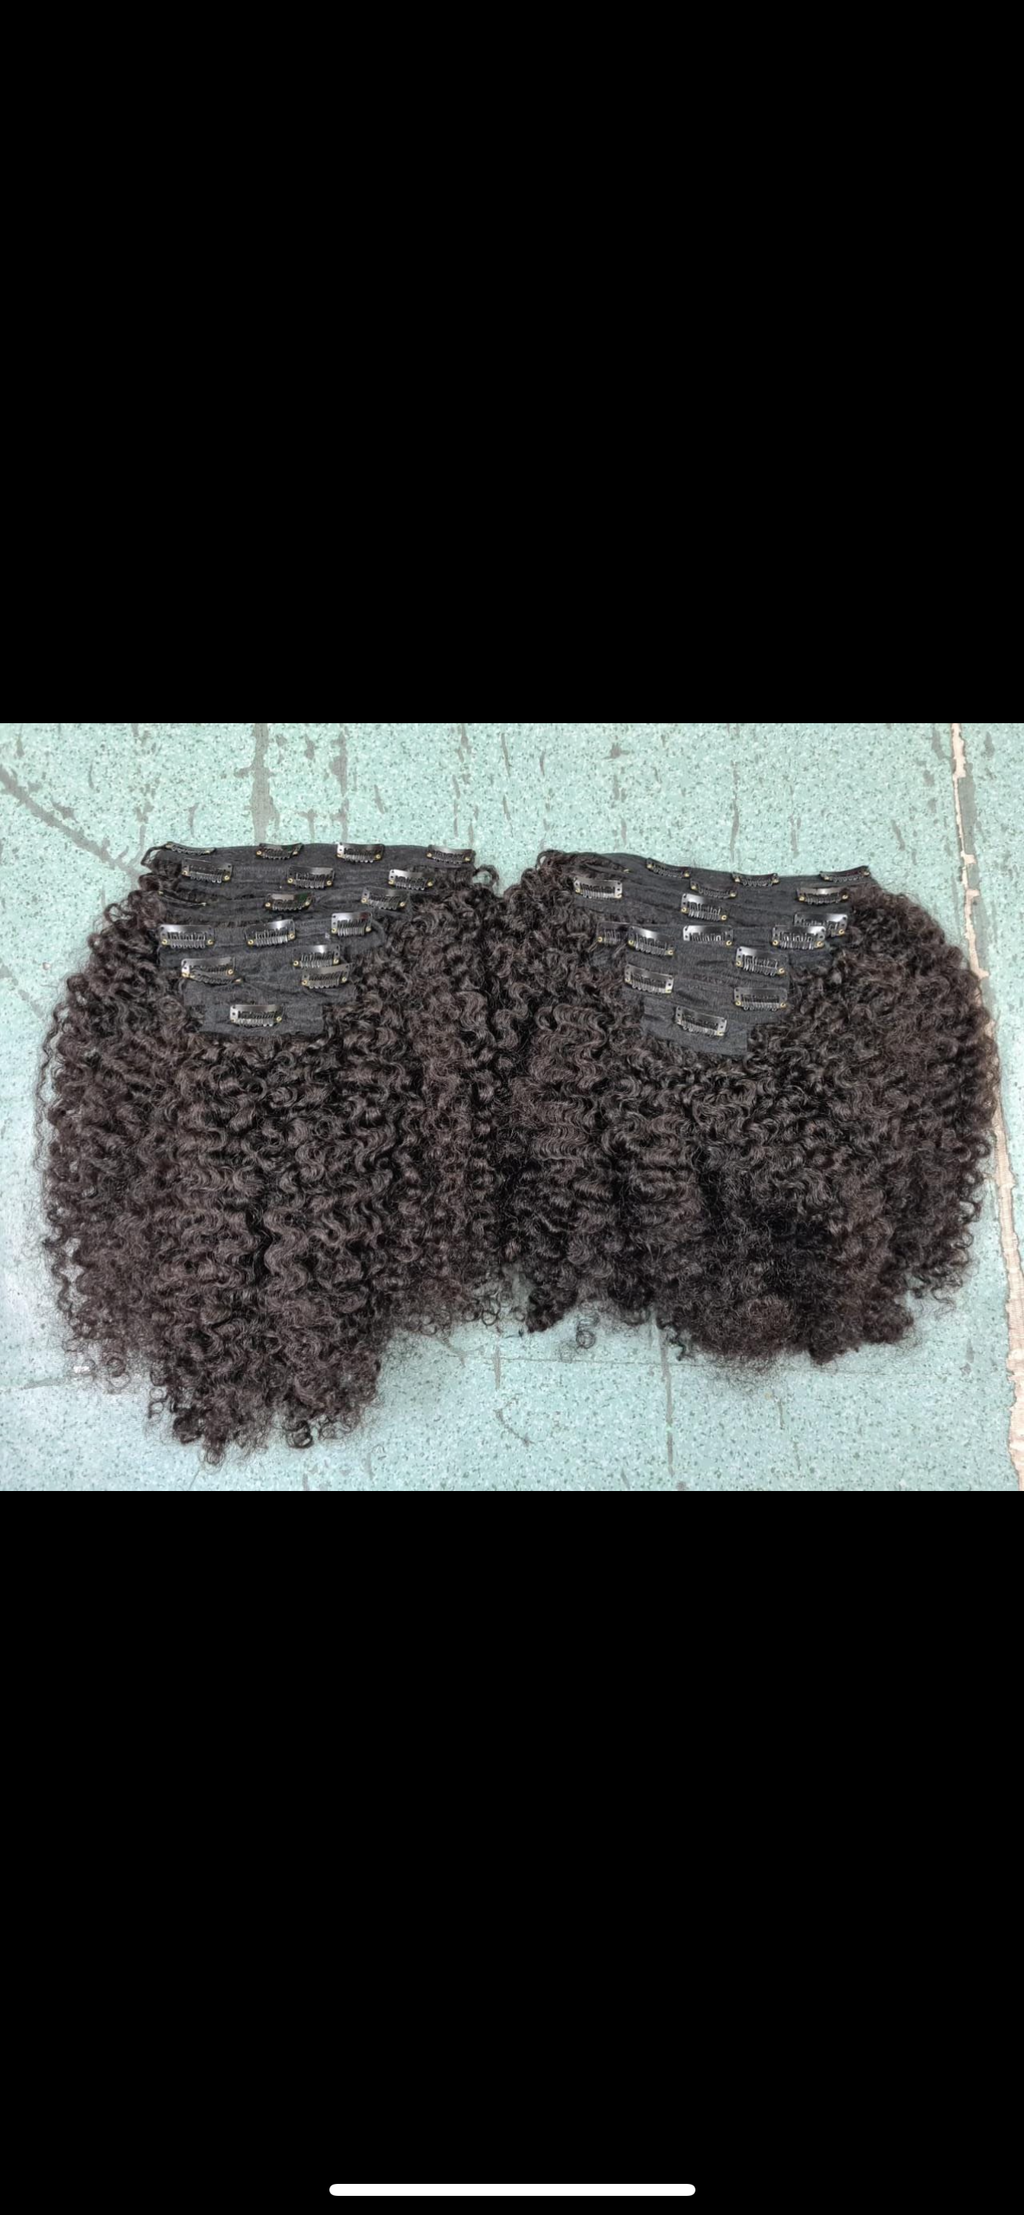 Kinky Curly Clip ins